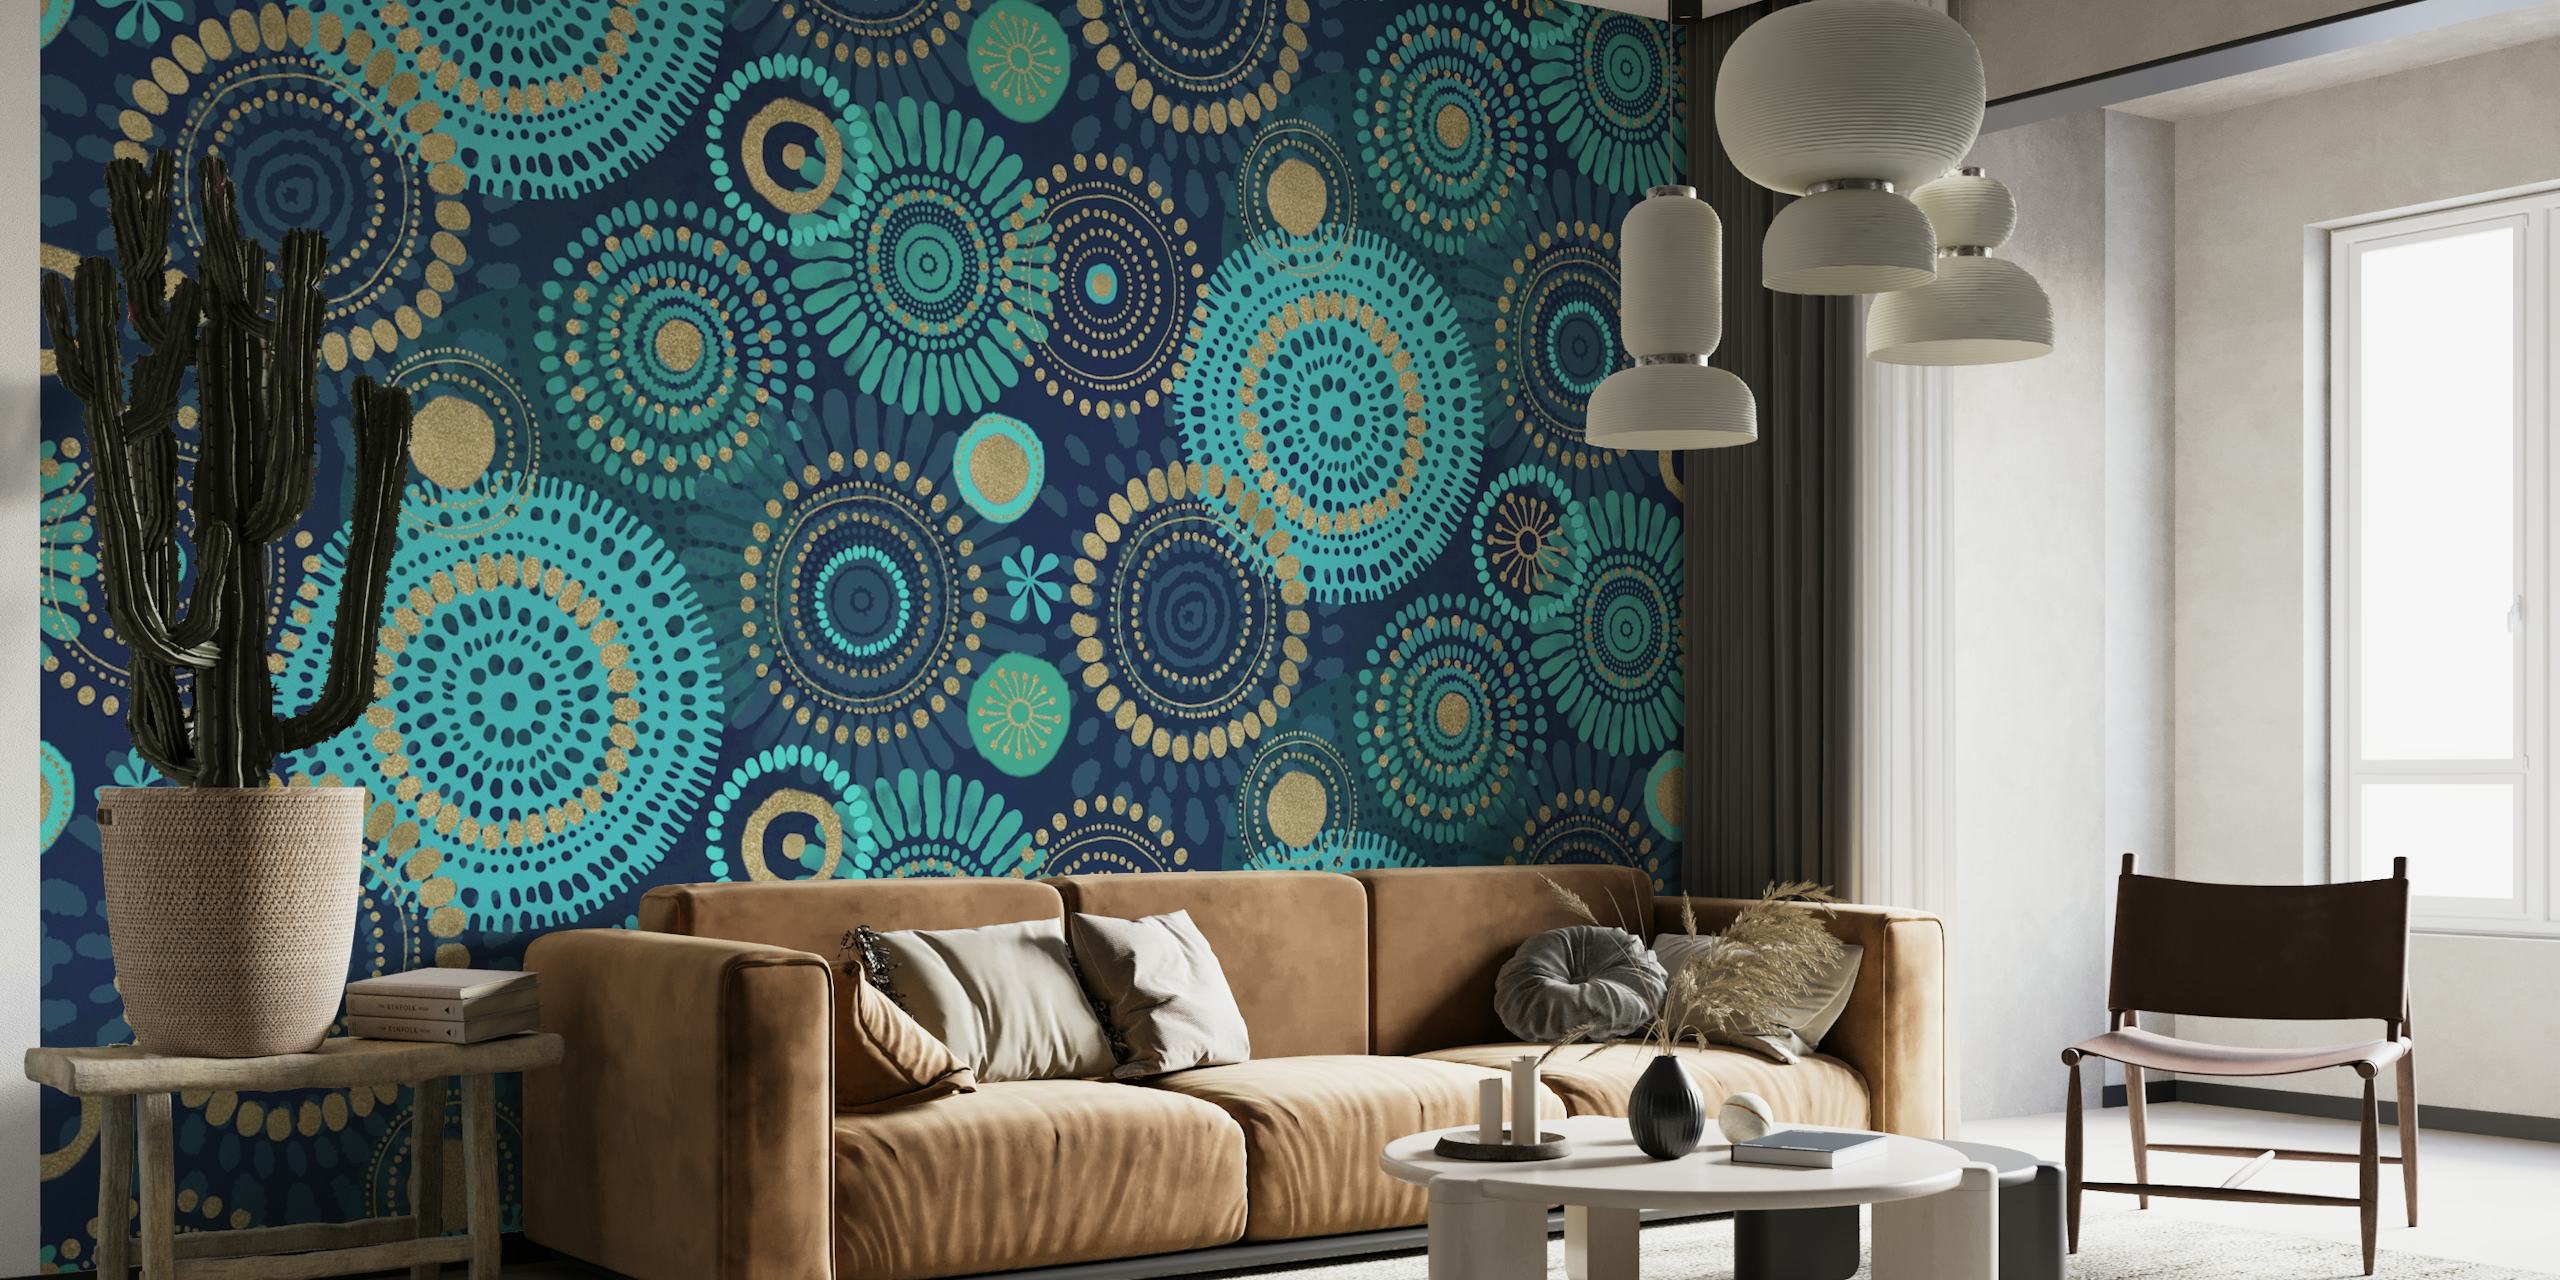 Opulent Rhapsody Of India Turquoise Teal Gold wallpaper